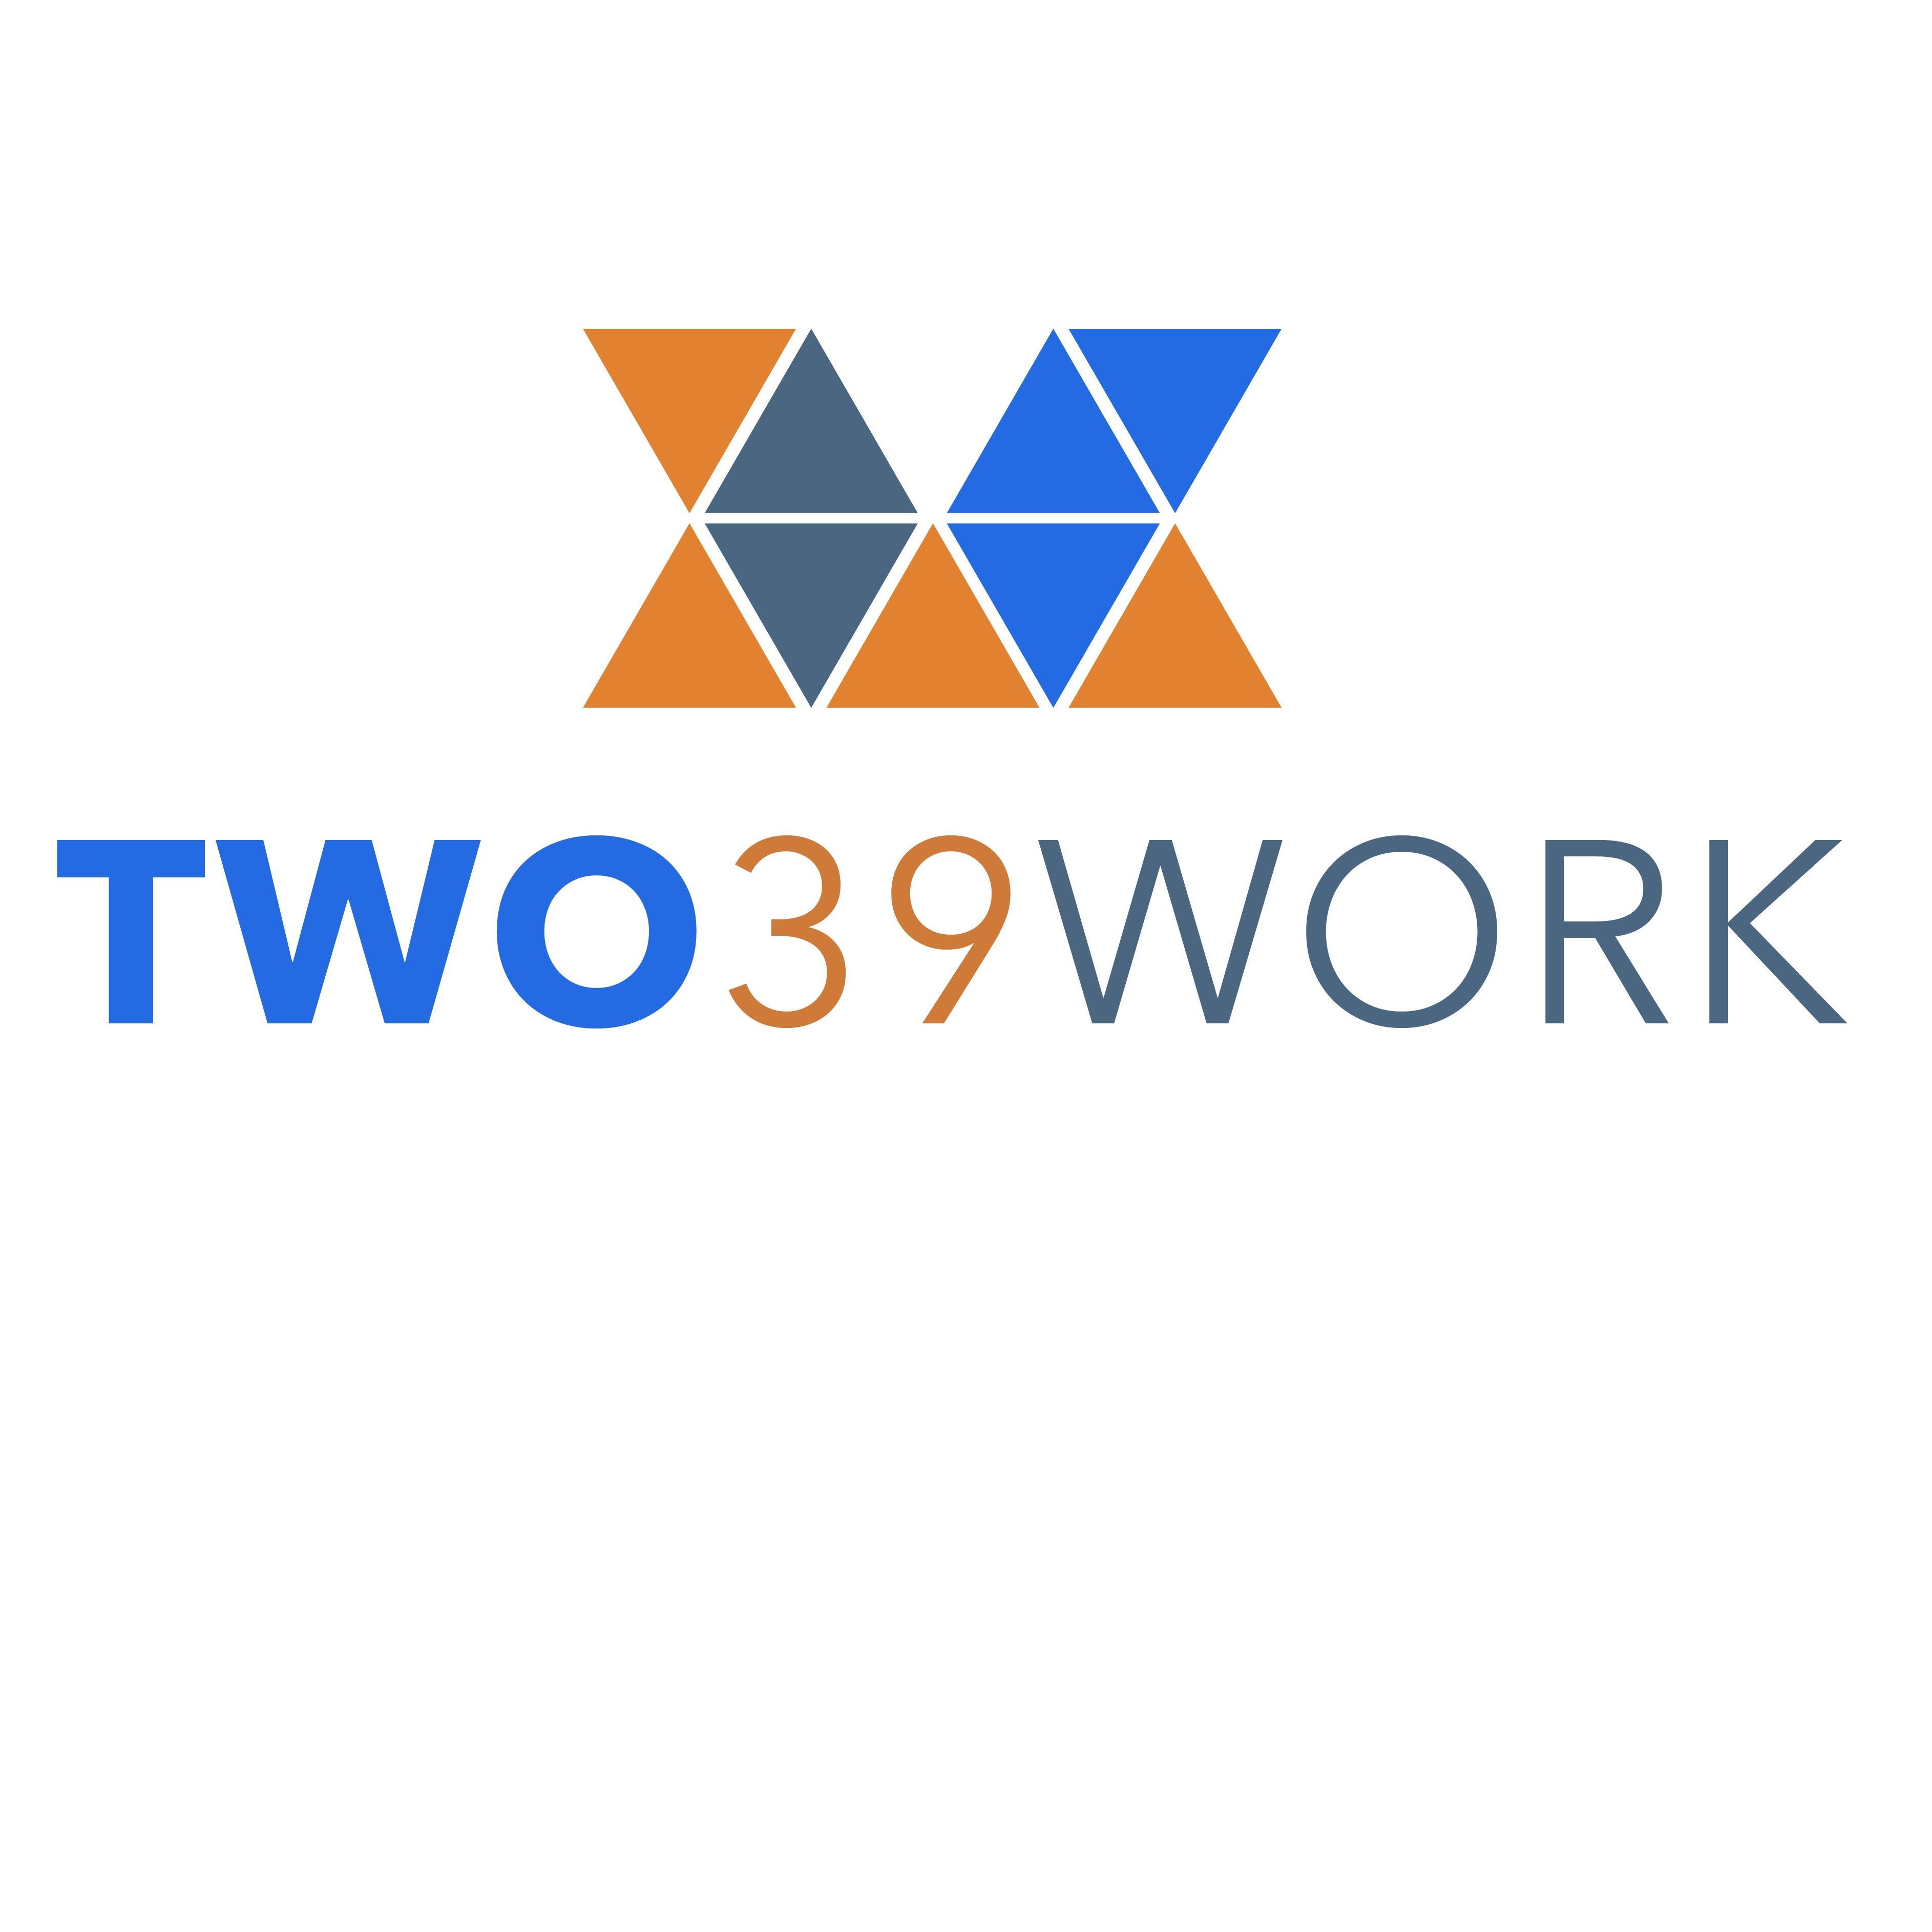 TWO39WORK